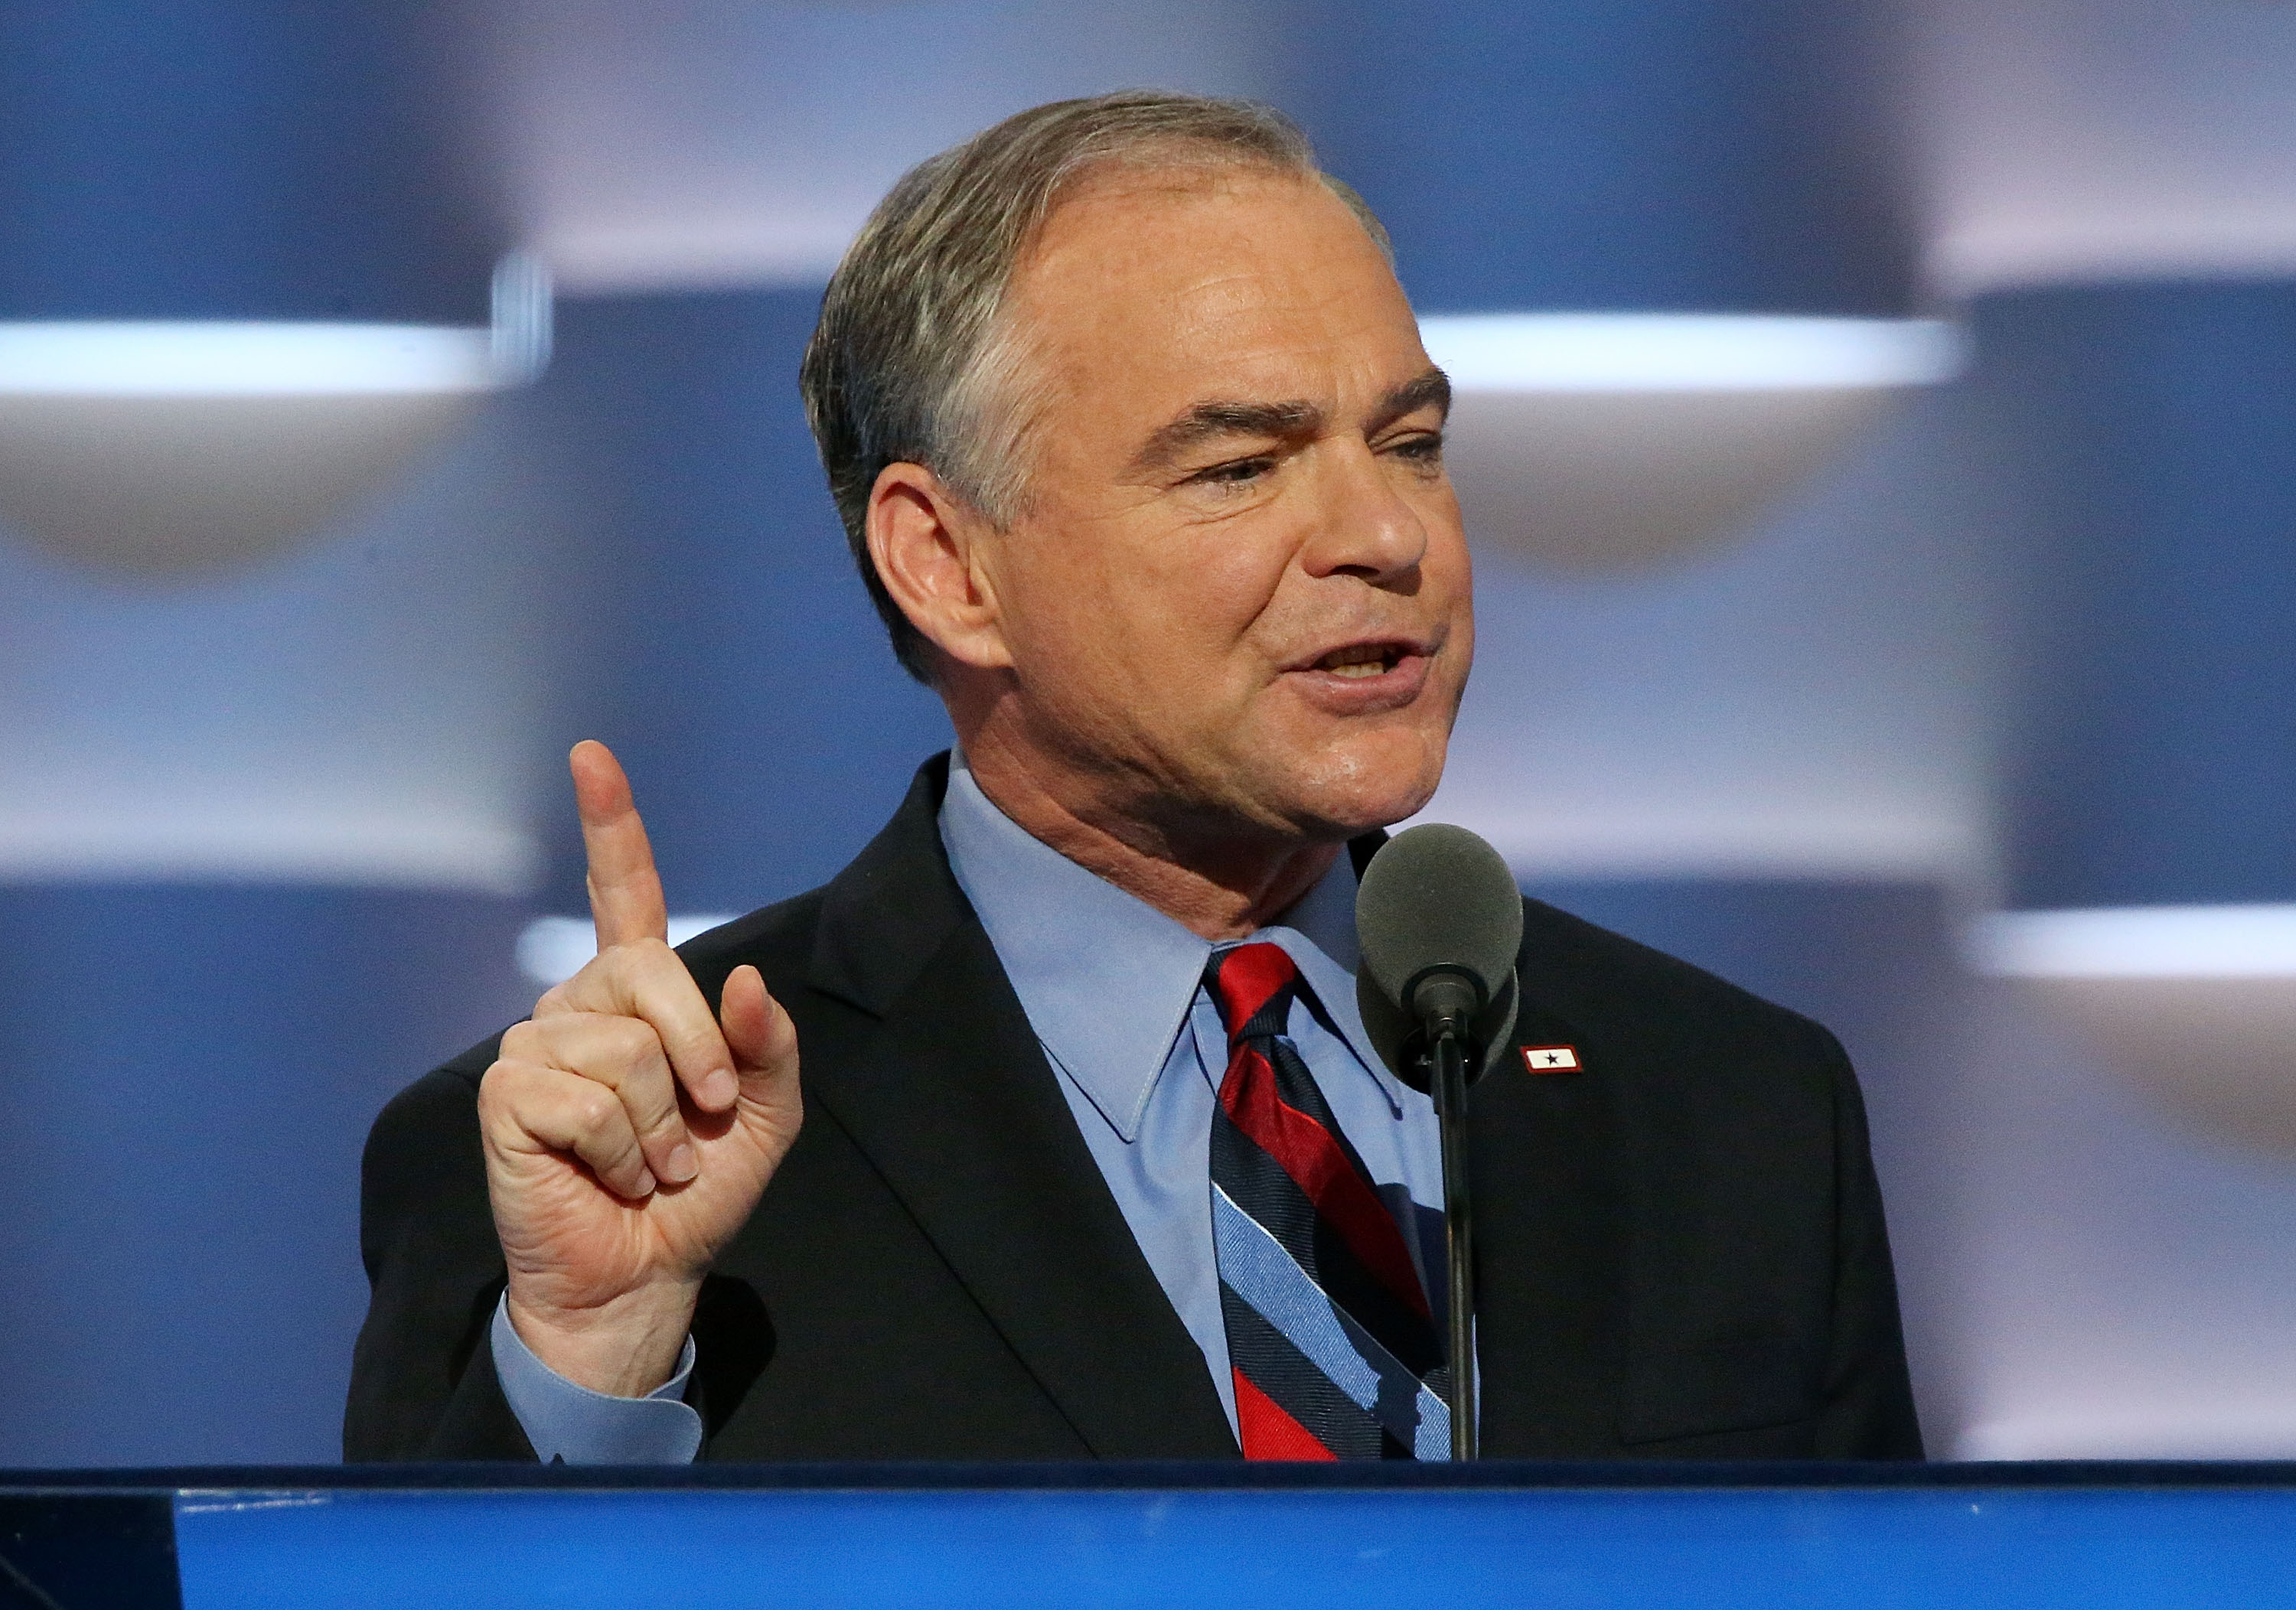 U.S. Vice President nominee Tim Kaine delivers remarks on the third day of the Democratic National Convention at the Wells Fargo Center on July 27, 2016 in Philadelphia, Pennsylvania. (Paul Morigi—WireImage)